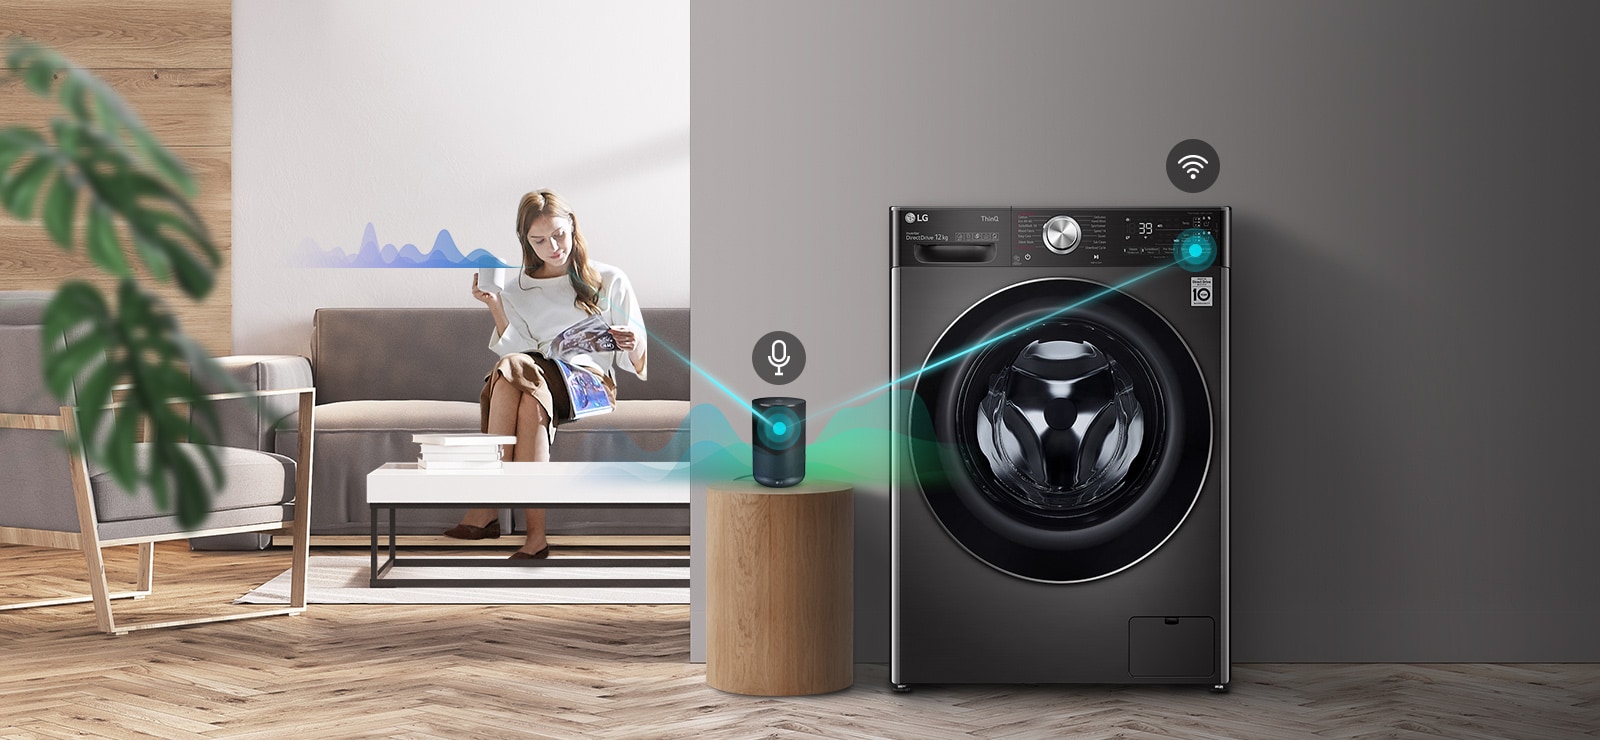 A woman sitting on the couch and drinking tea is giving orders to her washing machine through her AI speaker.